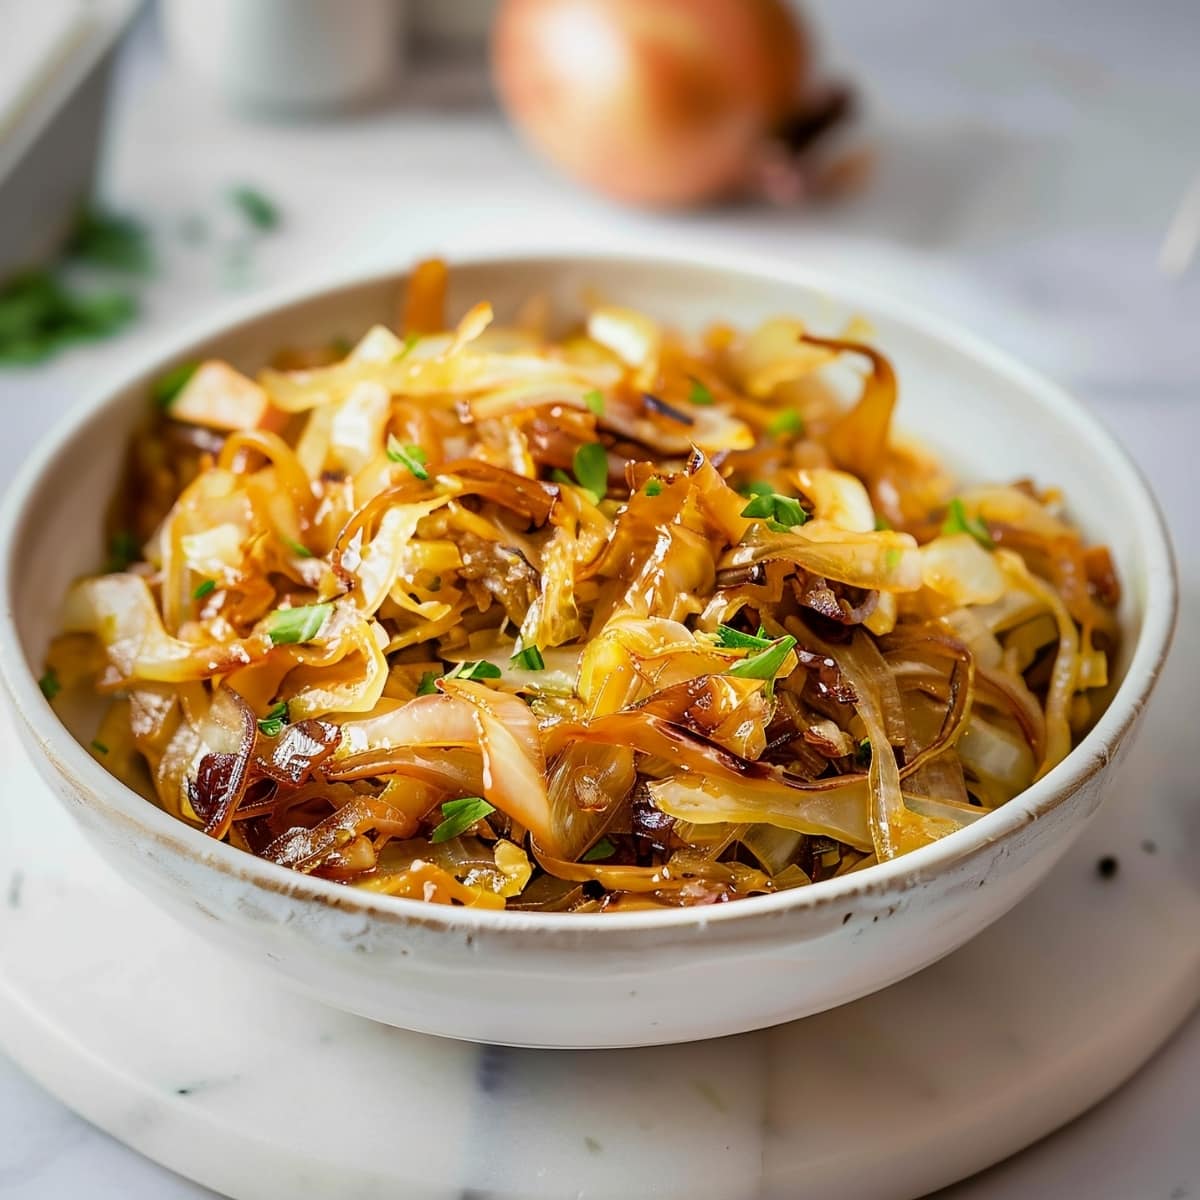 Savory homemade caramelized cabbage in a bowl